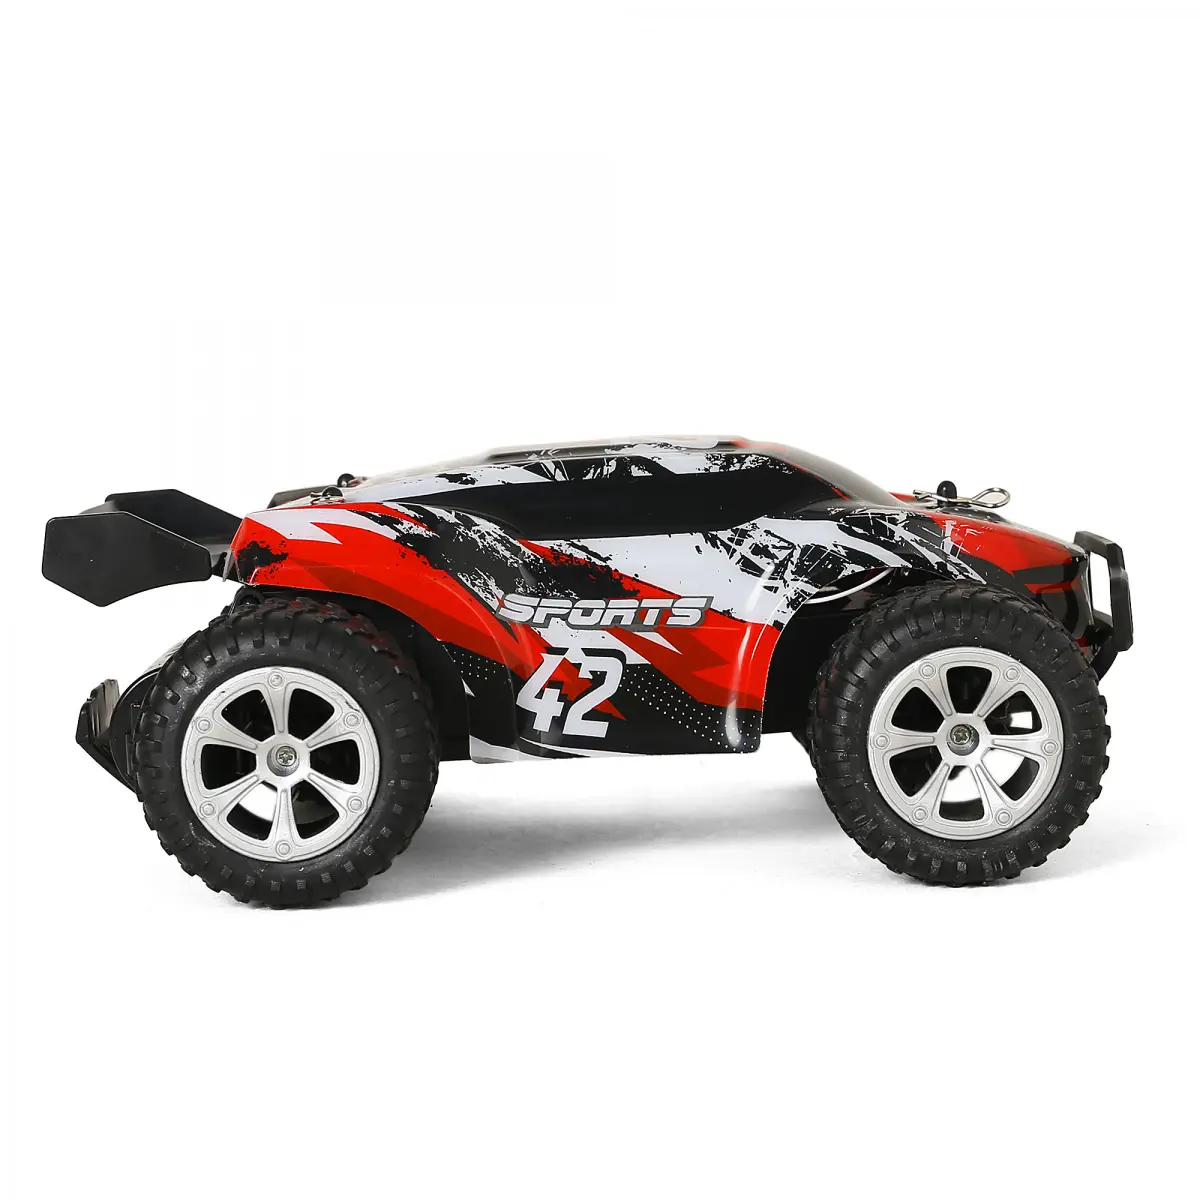 Sirius Toys Track Drifter High Speed Off Roader, 6Y+, Multicolour